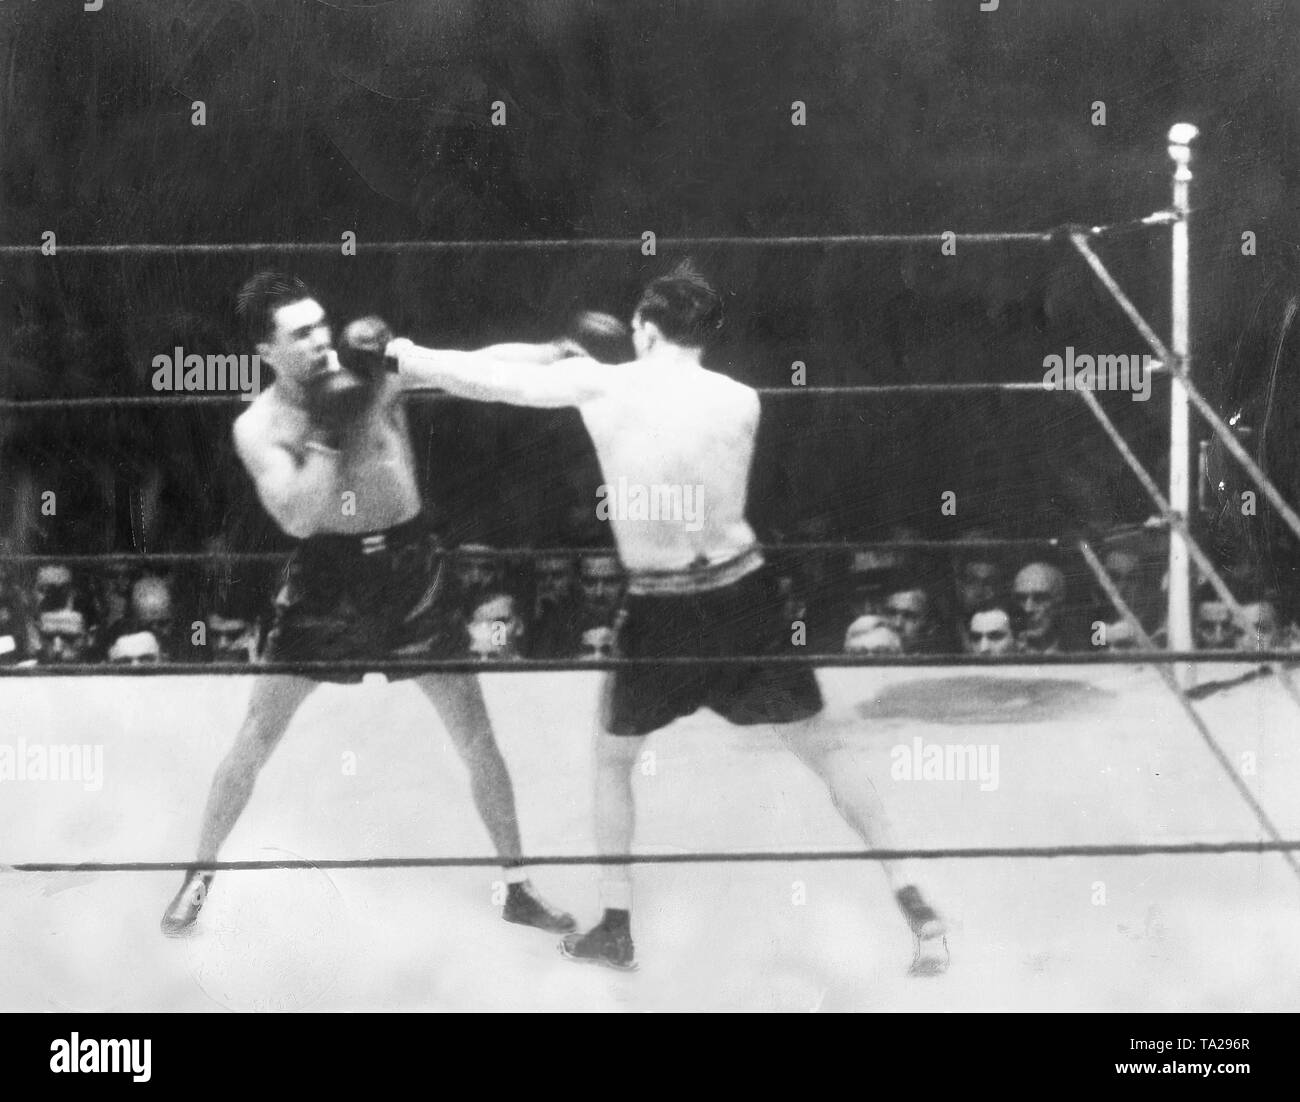 The German boxer Max Schmeling (on the right) at the world championship match against the American boxer Jack Sharkey. Schmeling lost the fight by a controversial point defeat. Stock Photo